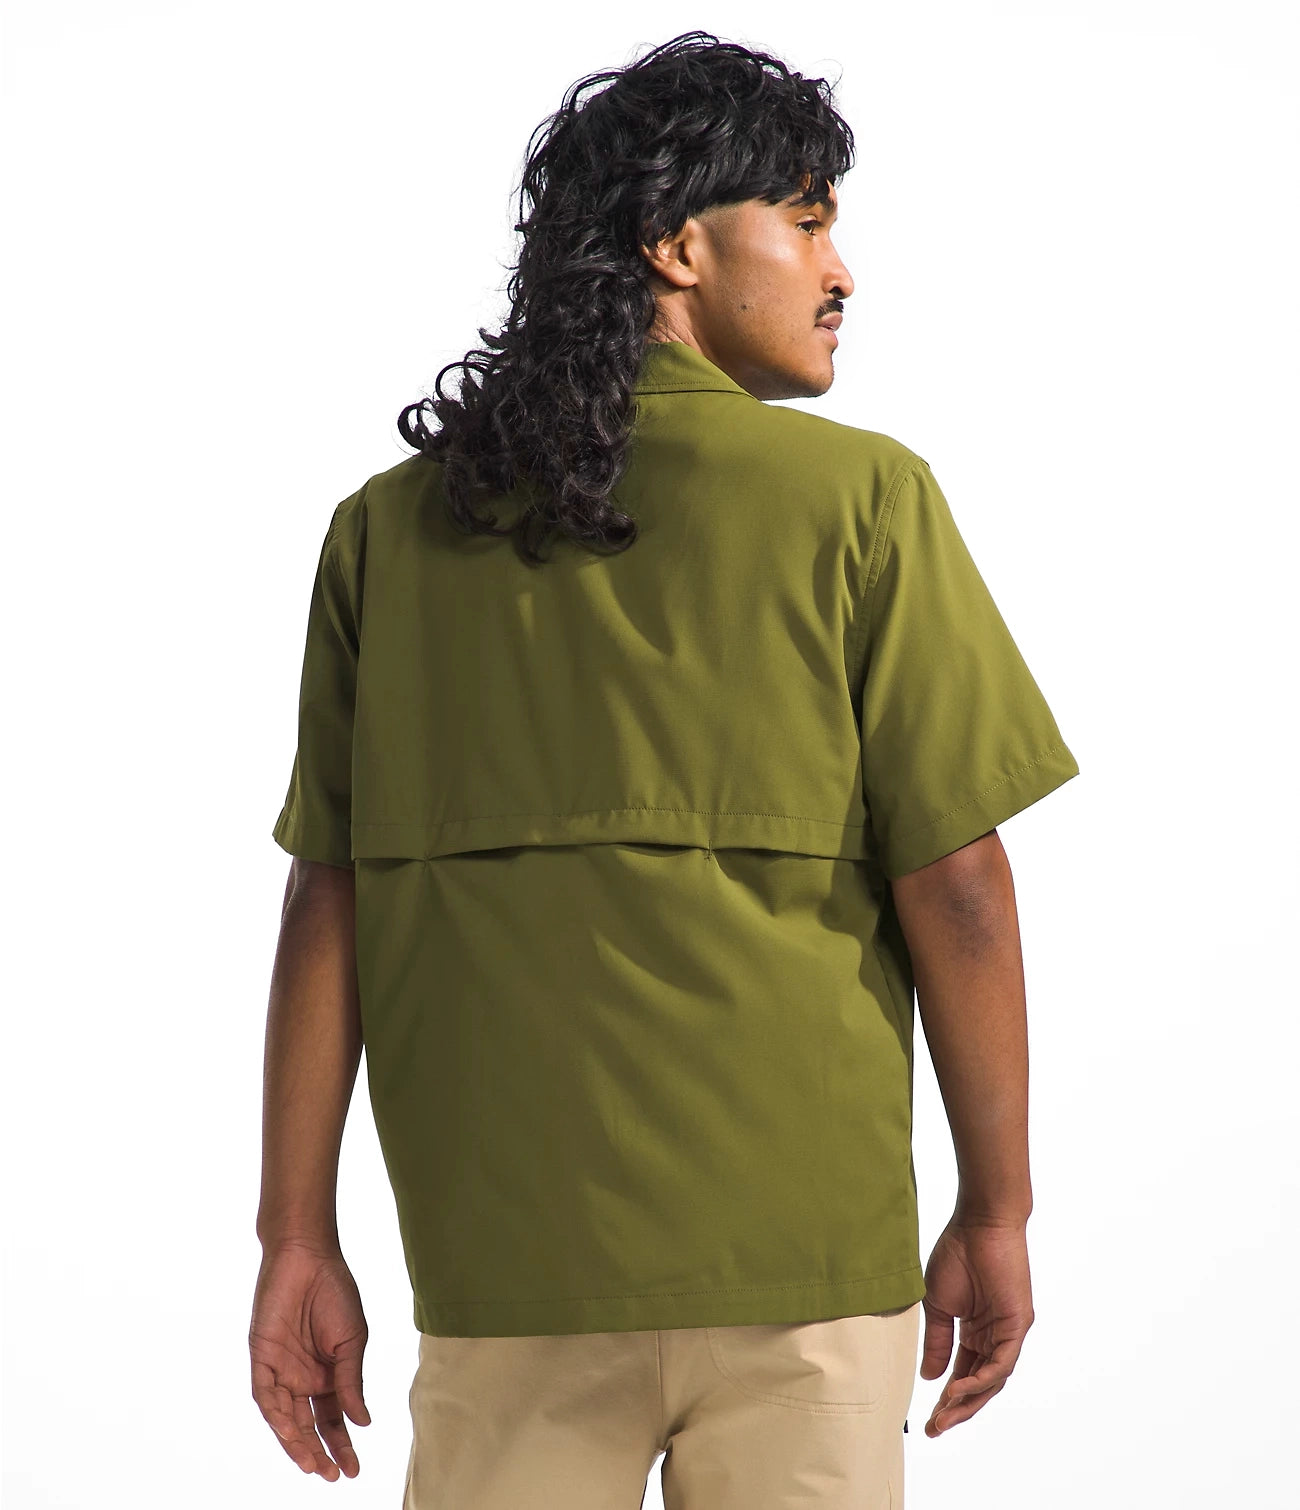 Men’s First Trail Short-Sleeve Shirt - Forest Olive